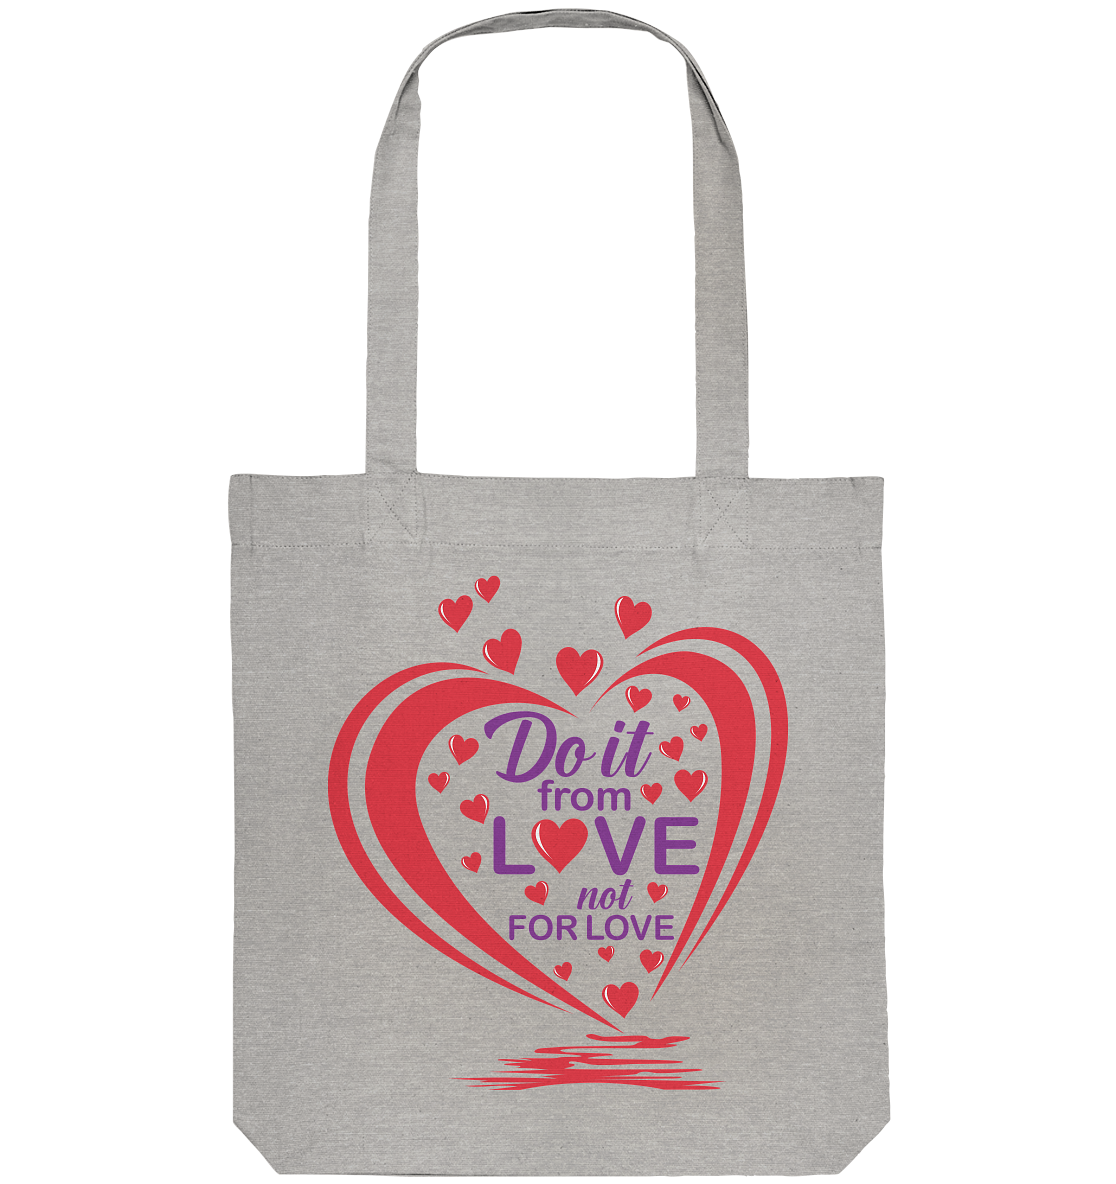 Do it from love not for love - Organic Tote-Bag